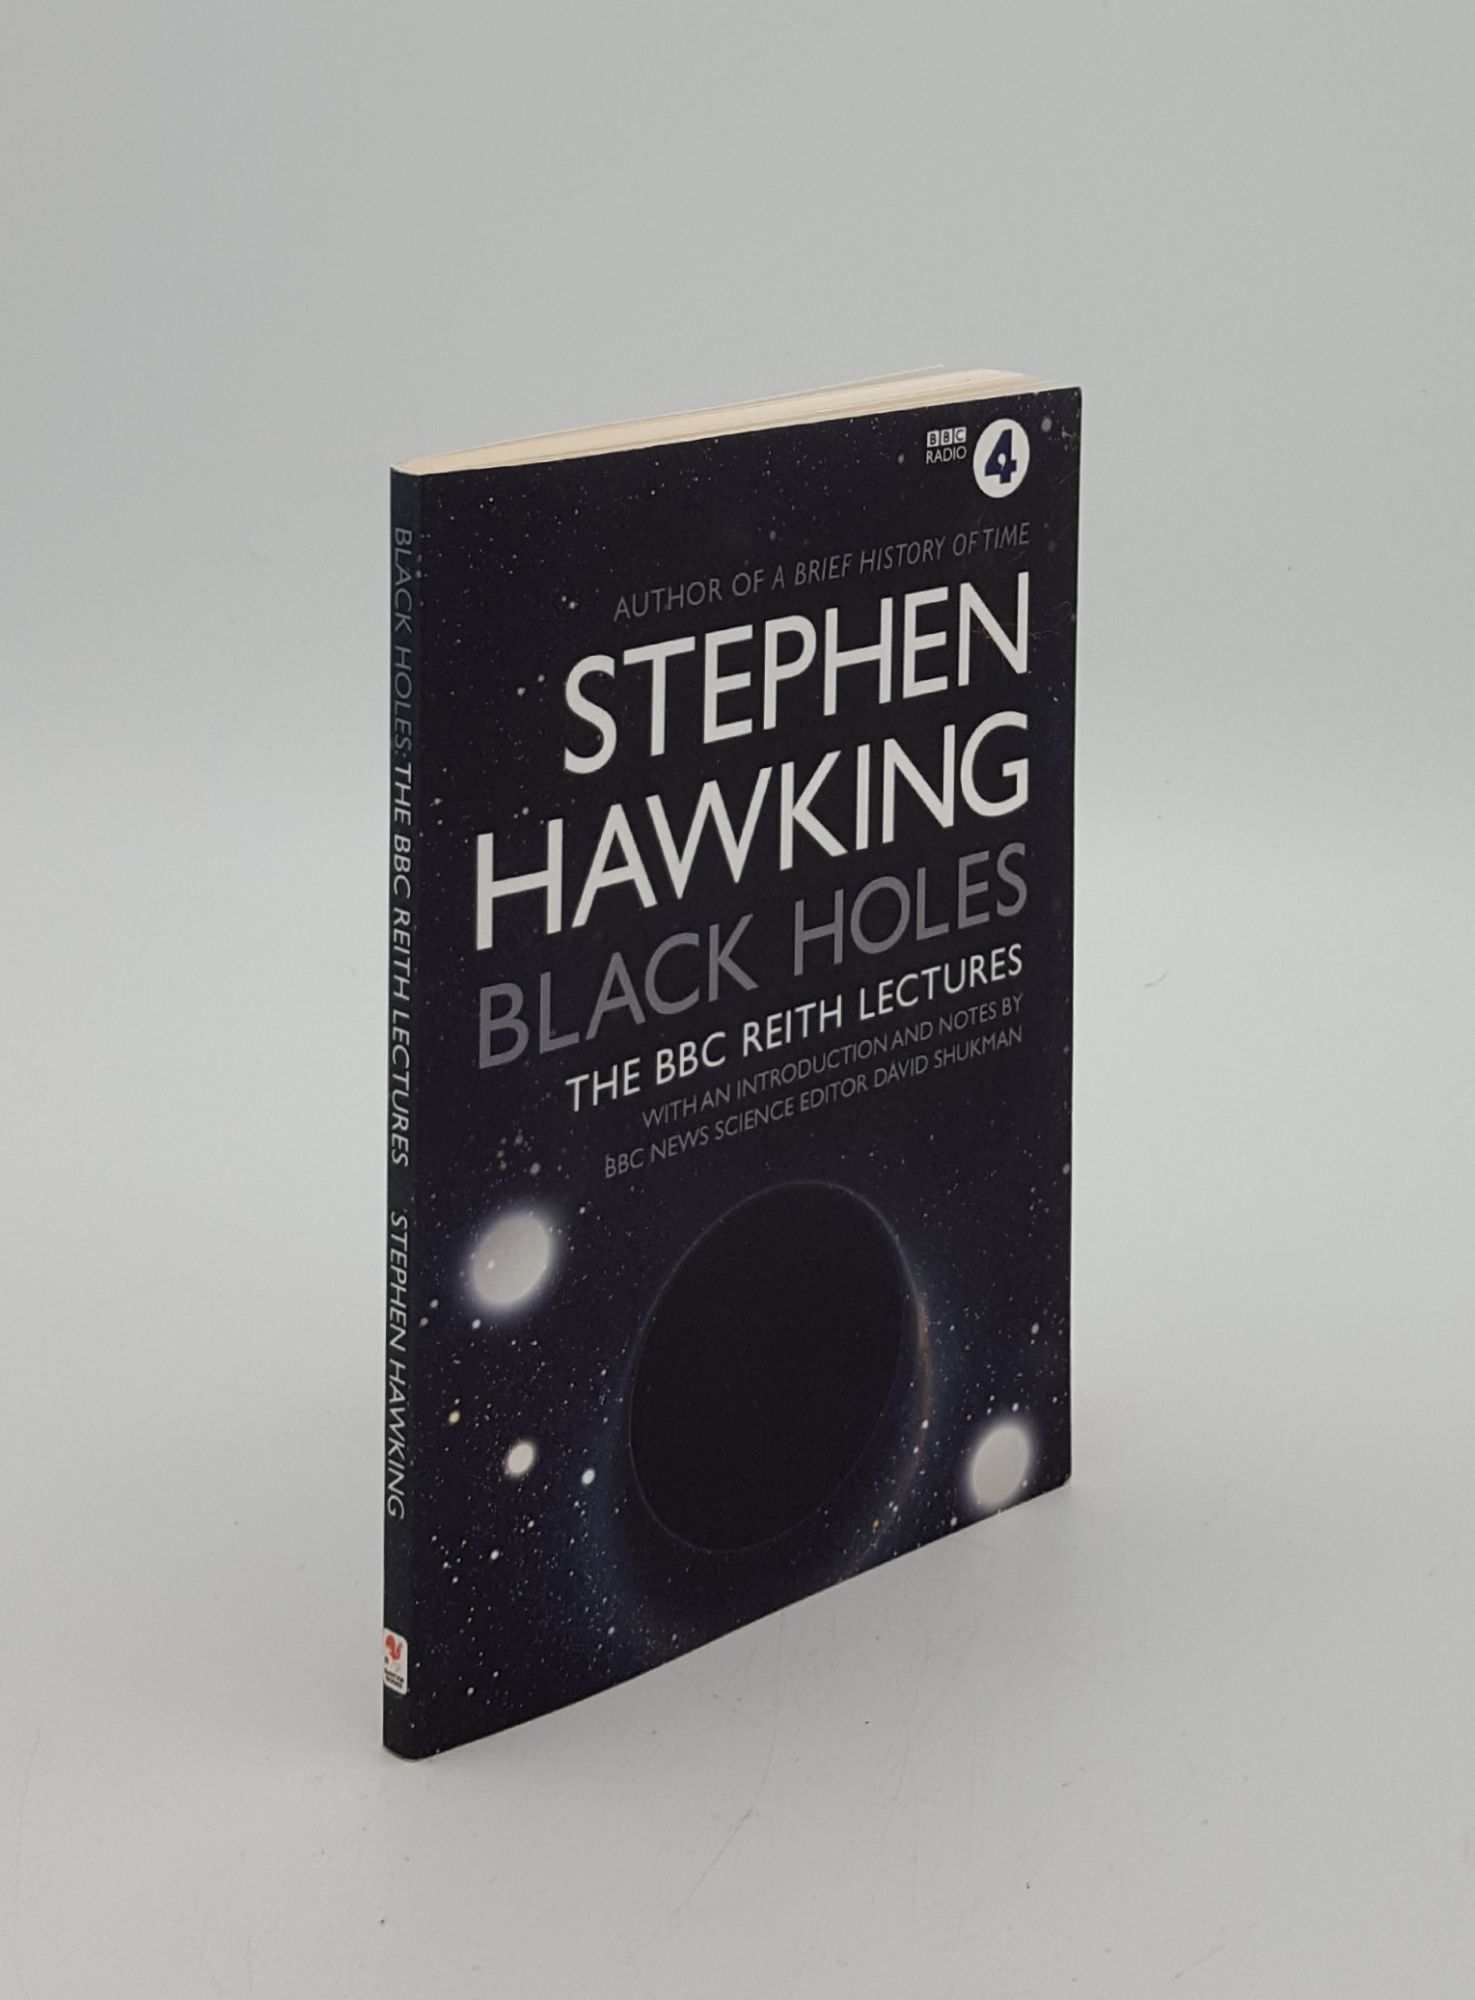 BLACK HOLES The BBC Reith Lectures - HAWKING Stephen